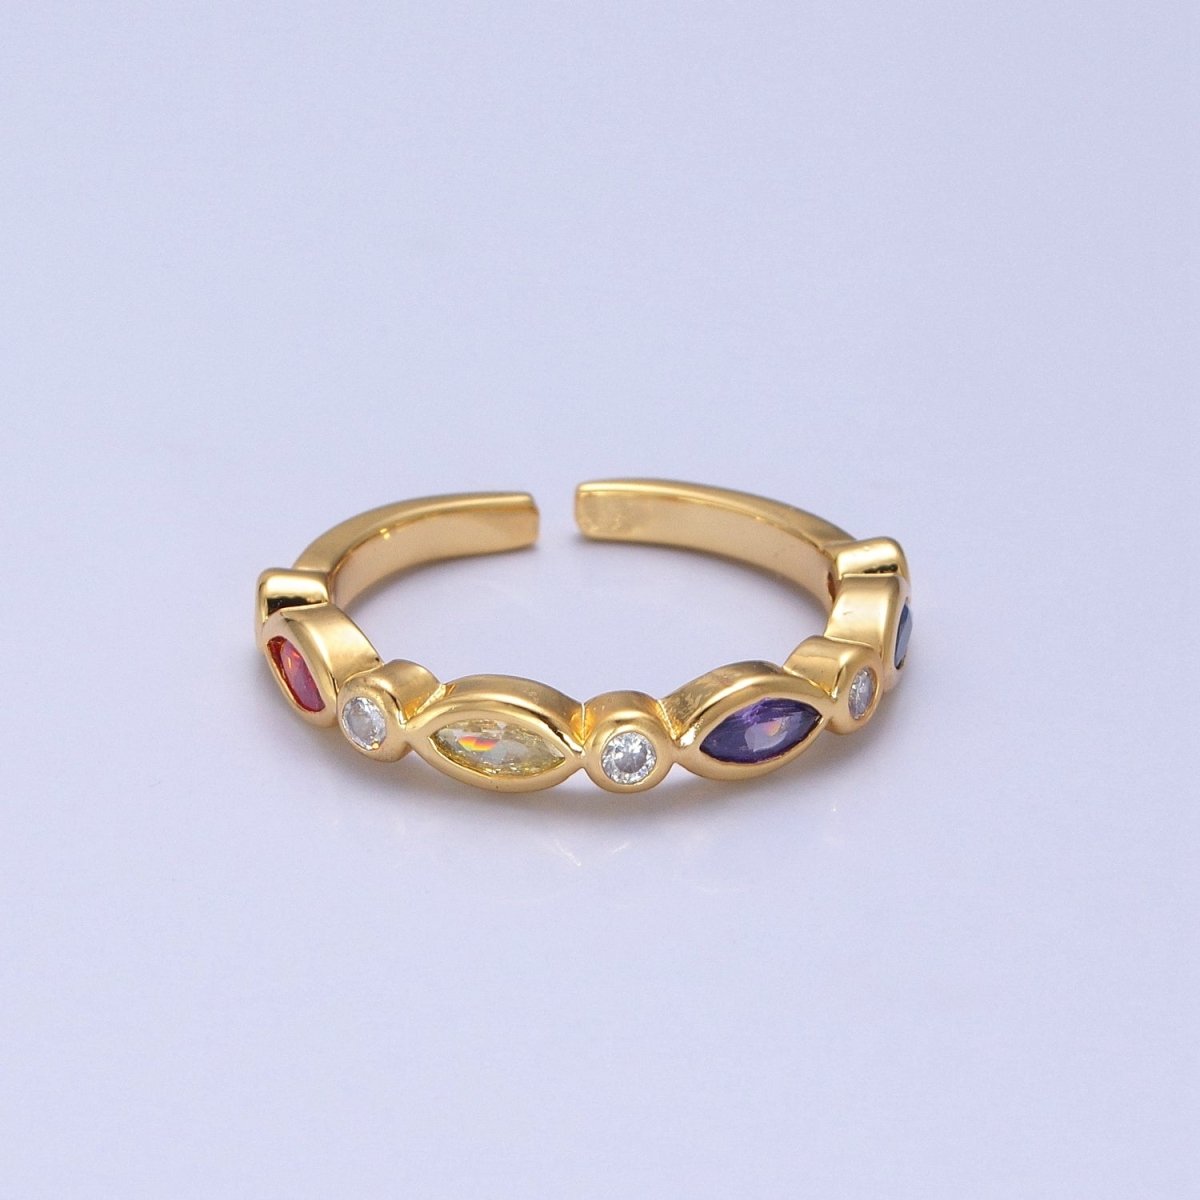 Colorful Cz ring, Gold Filled stacking ring Eye ring Thin CZ gold Ring Open Adjustable Ring O-2119 - DLUXCA